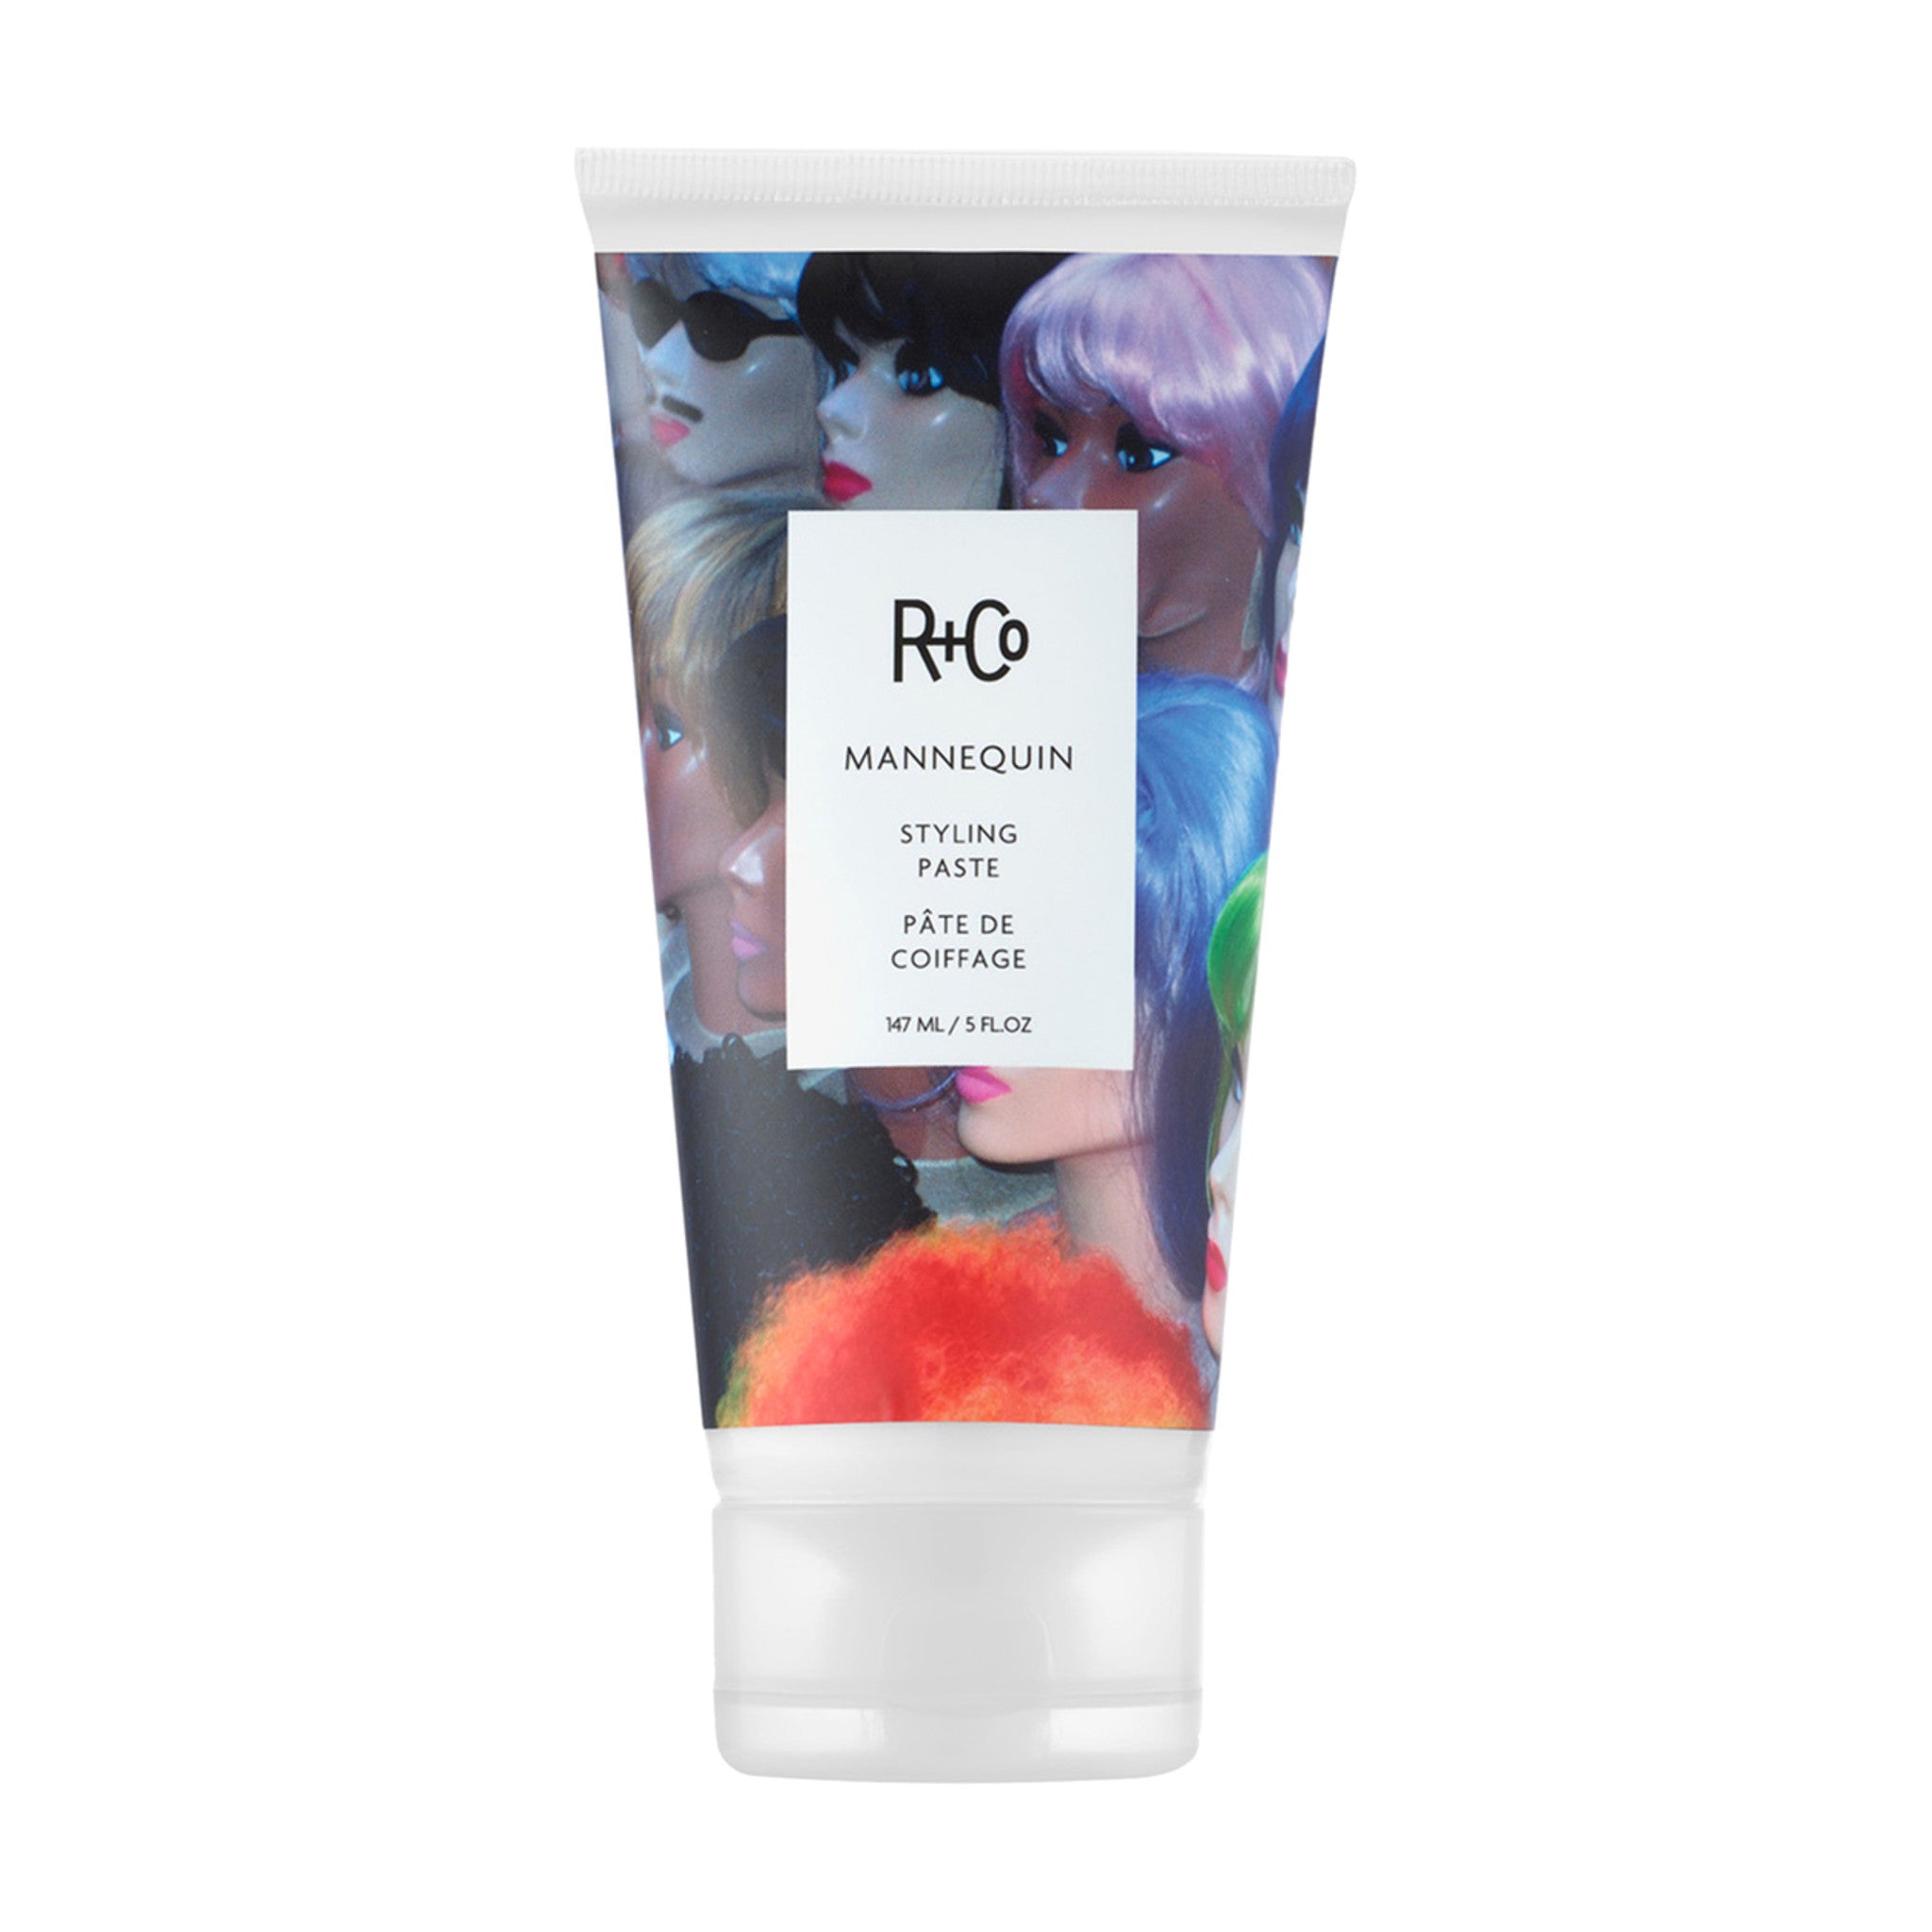 R+Co Mannequin Styling Paste main image.